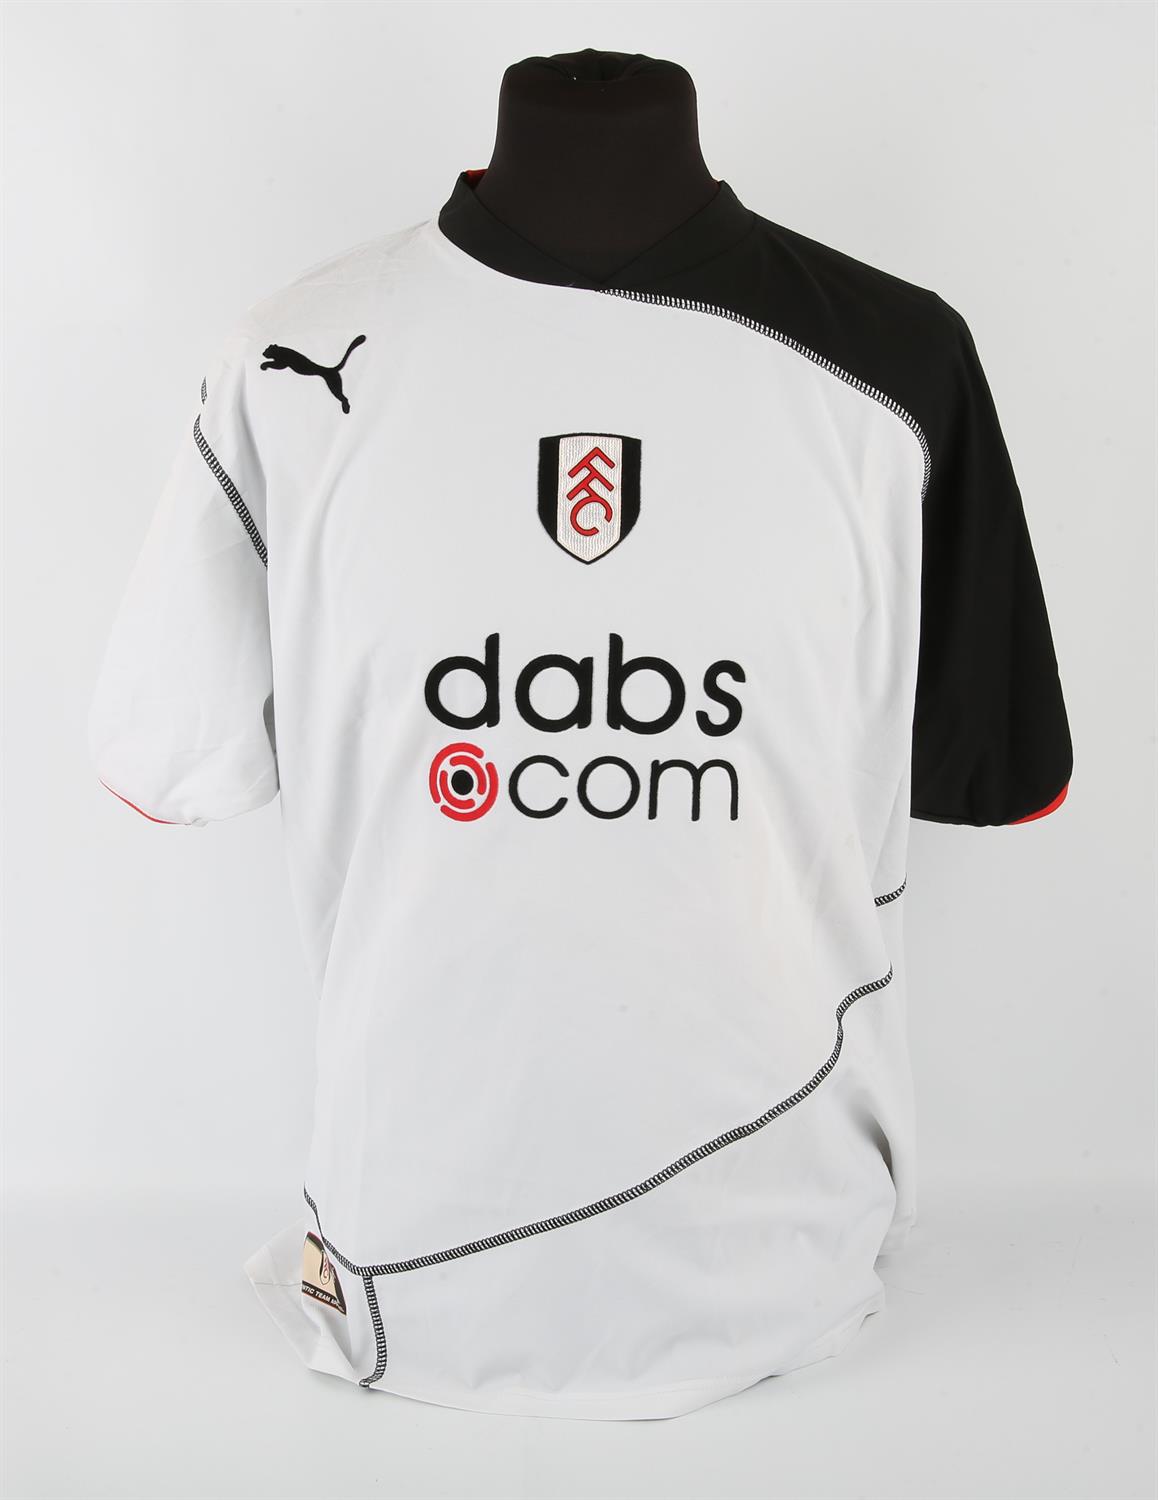 Fulham FC Football club, Goma (No.24) 125th Anniversary shirt (special sleeve patch) from 2004-2005, - Image 2 of 2